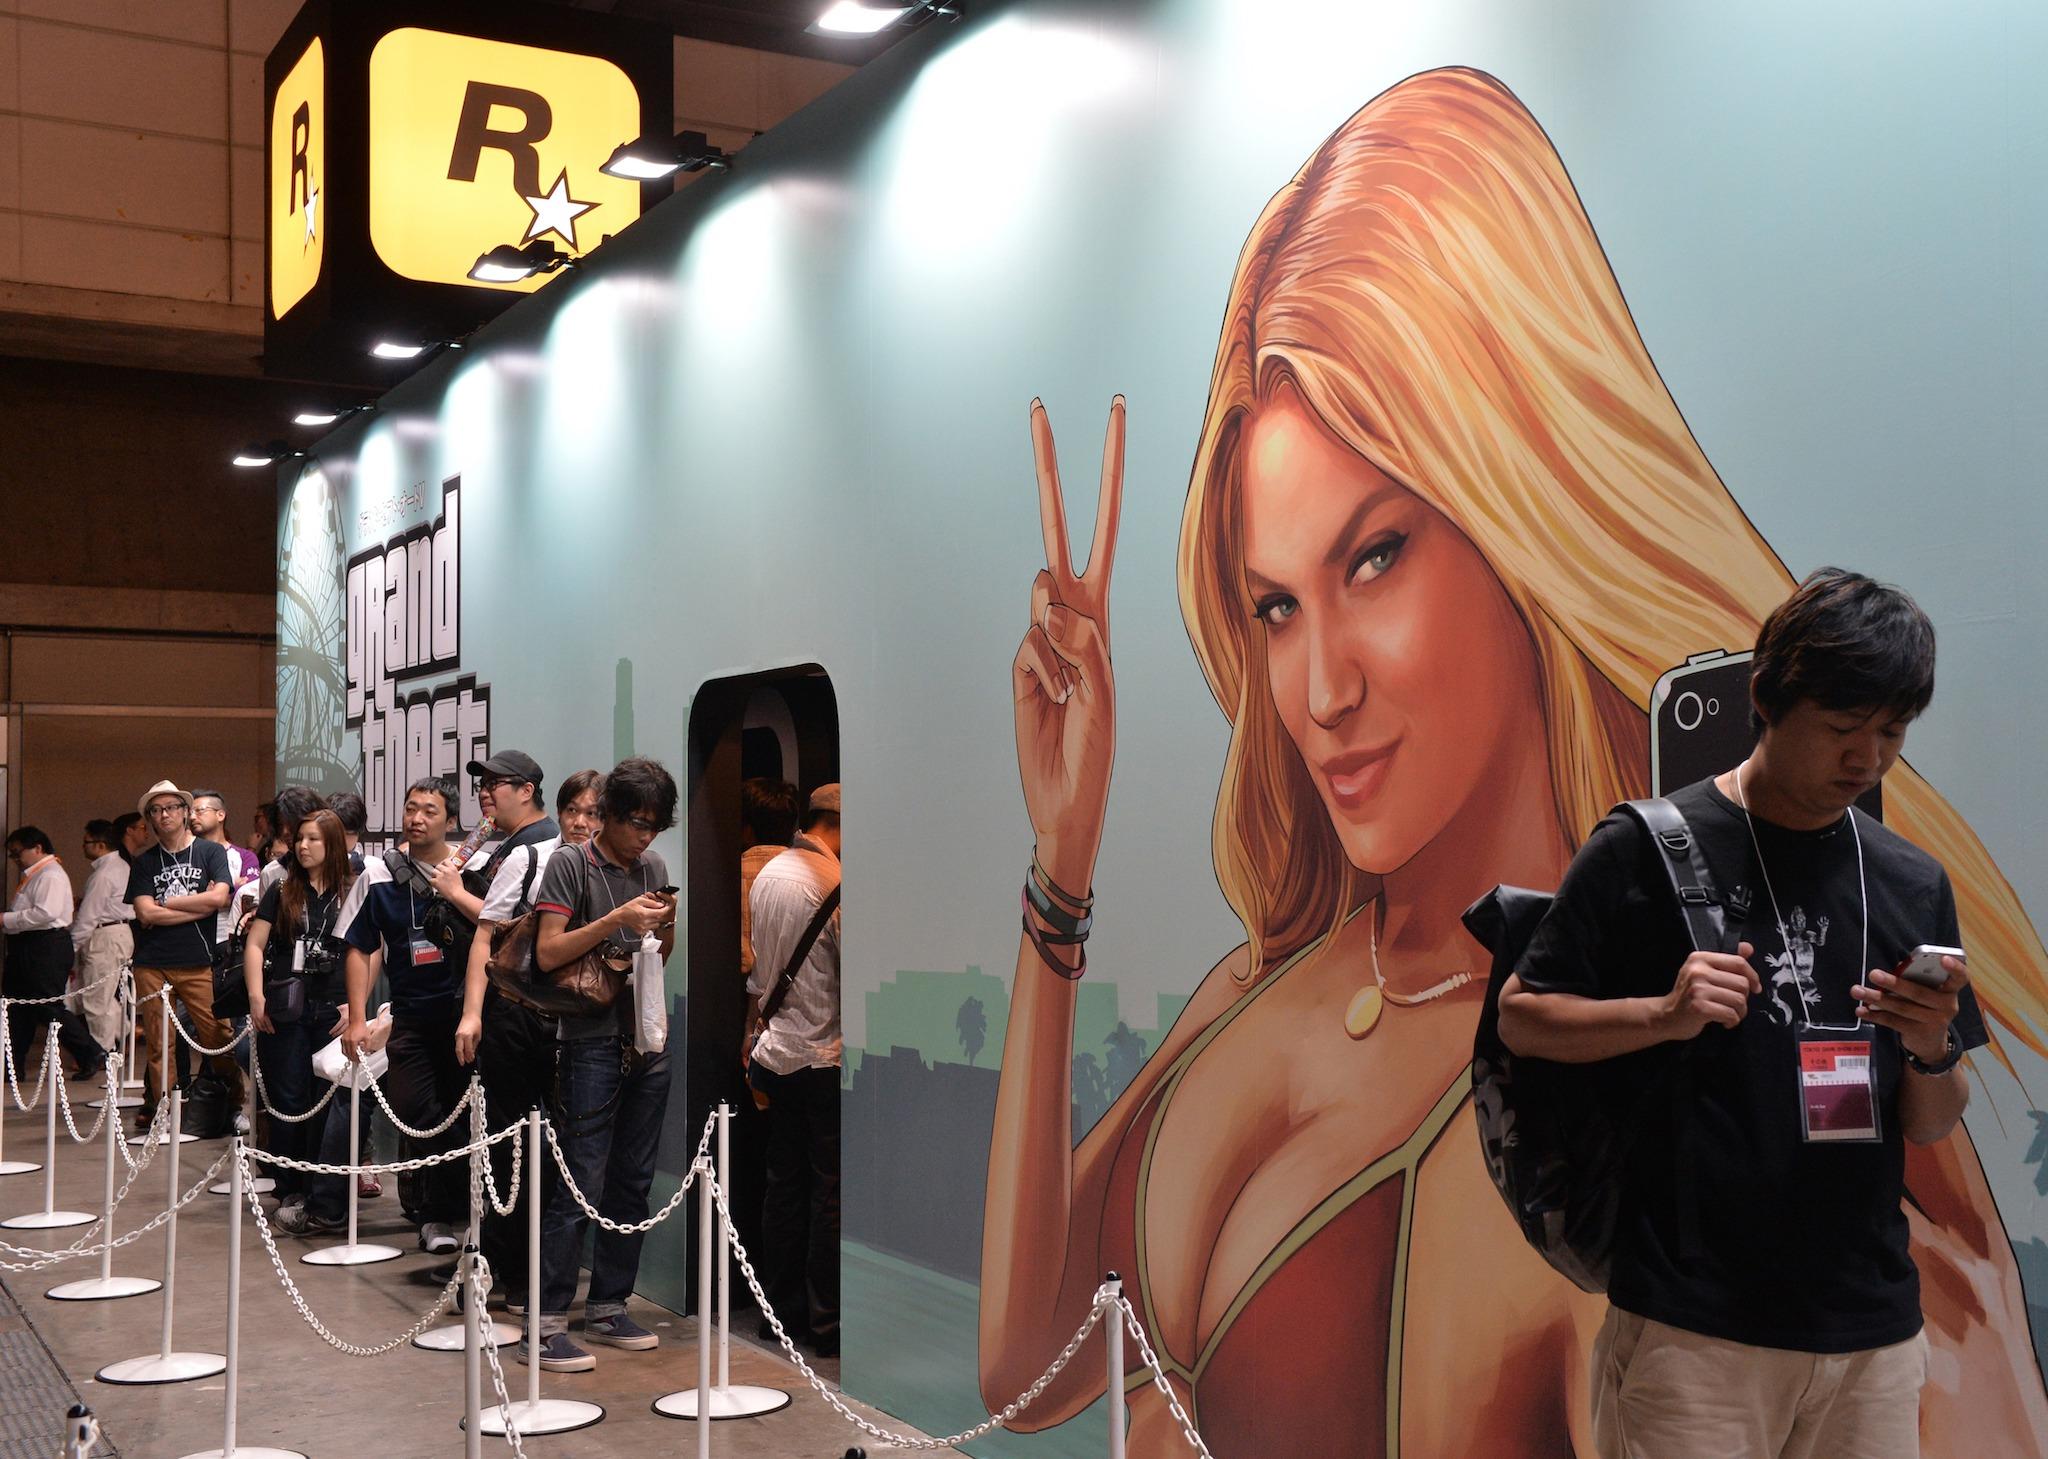 Visitors queue to play the new Rockstar Games videogame "Grand Theft Auto V"